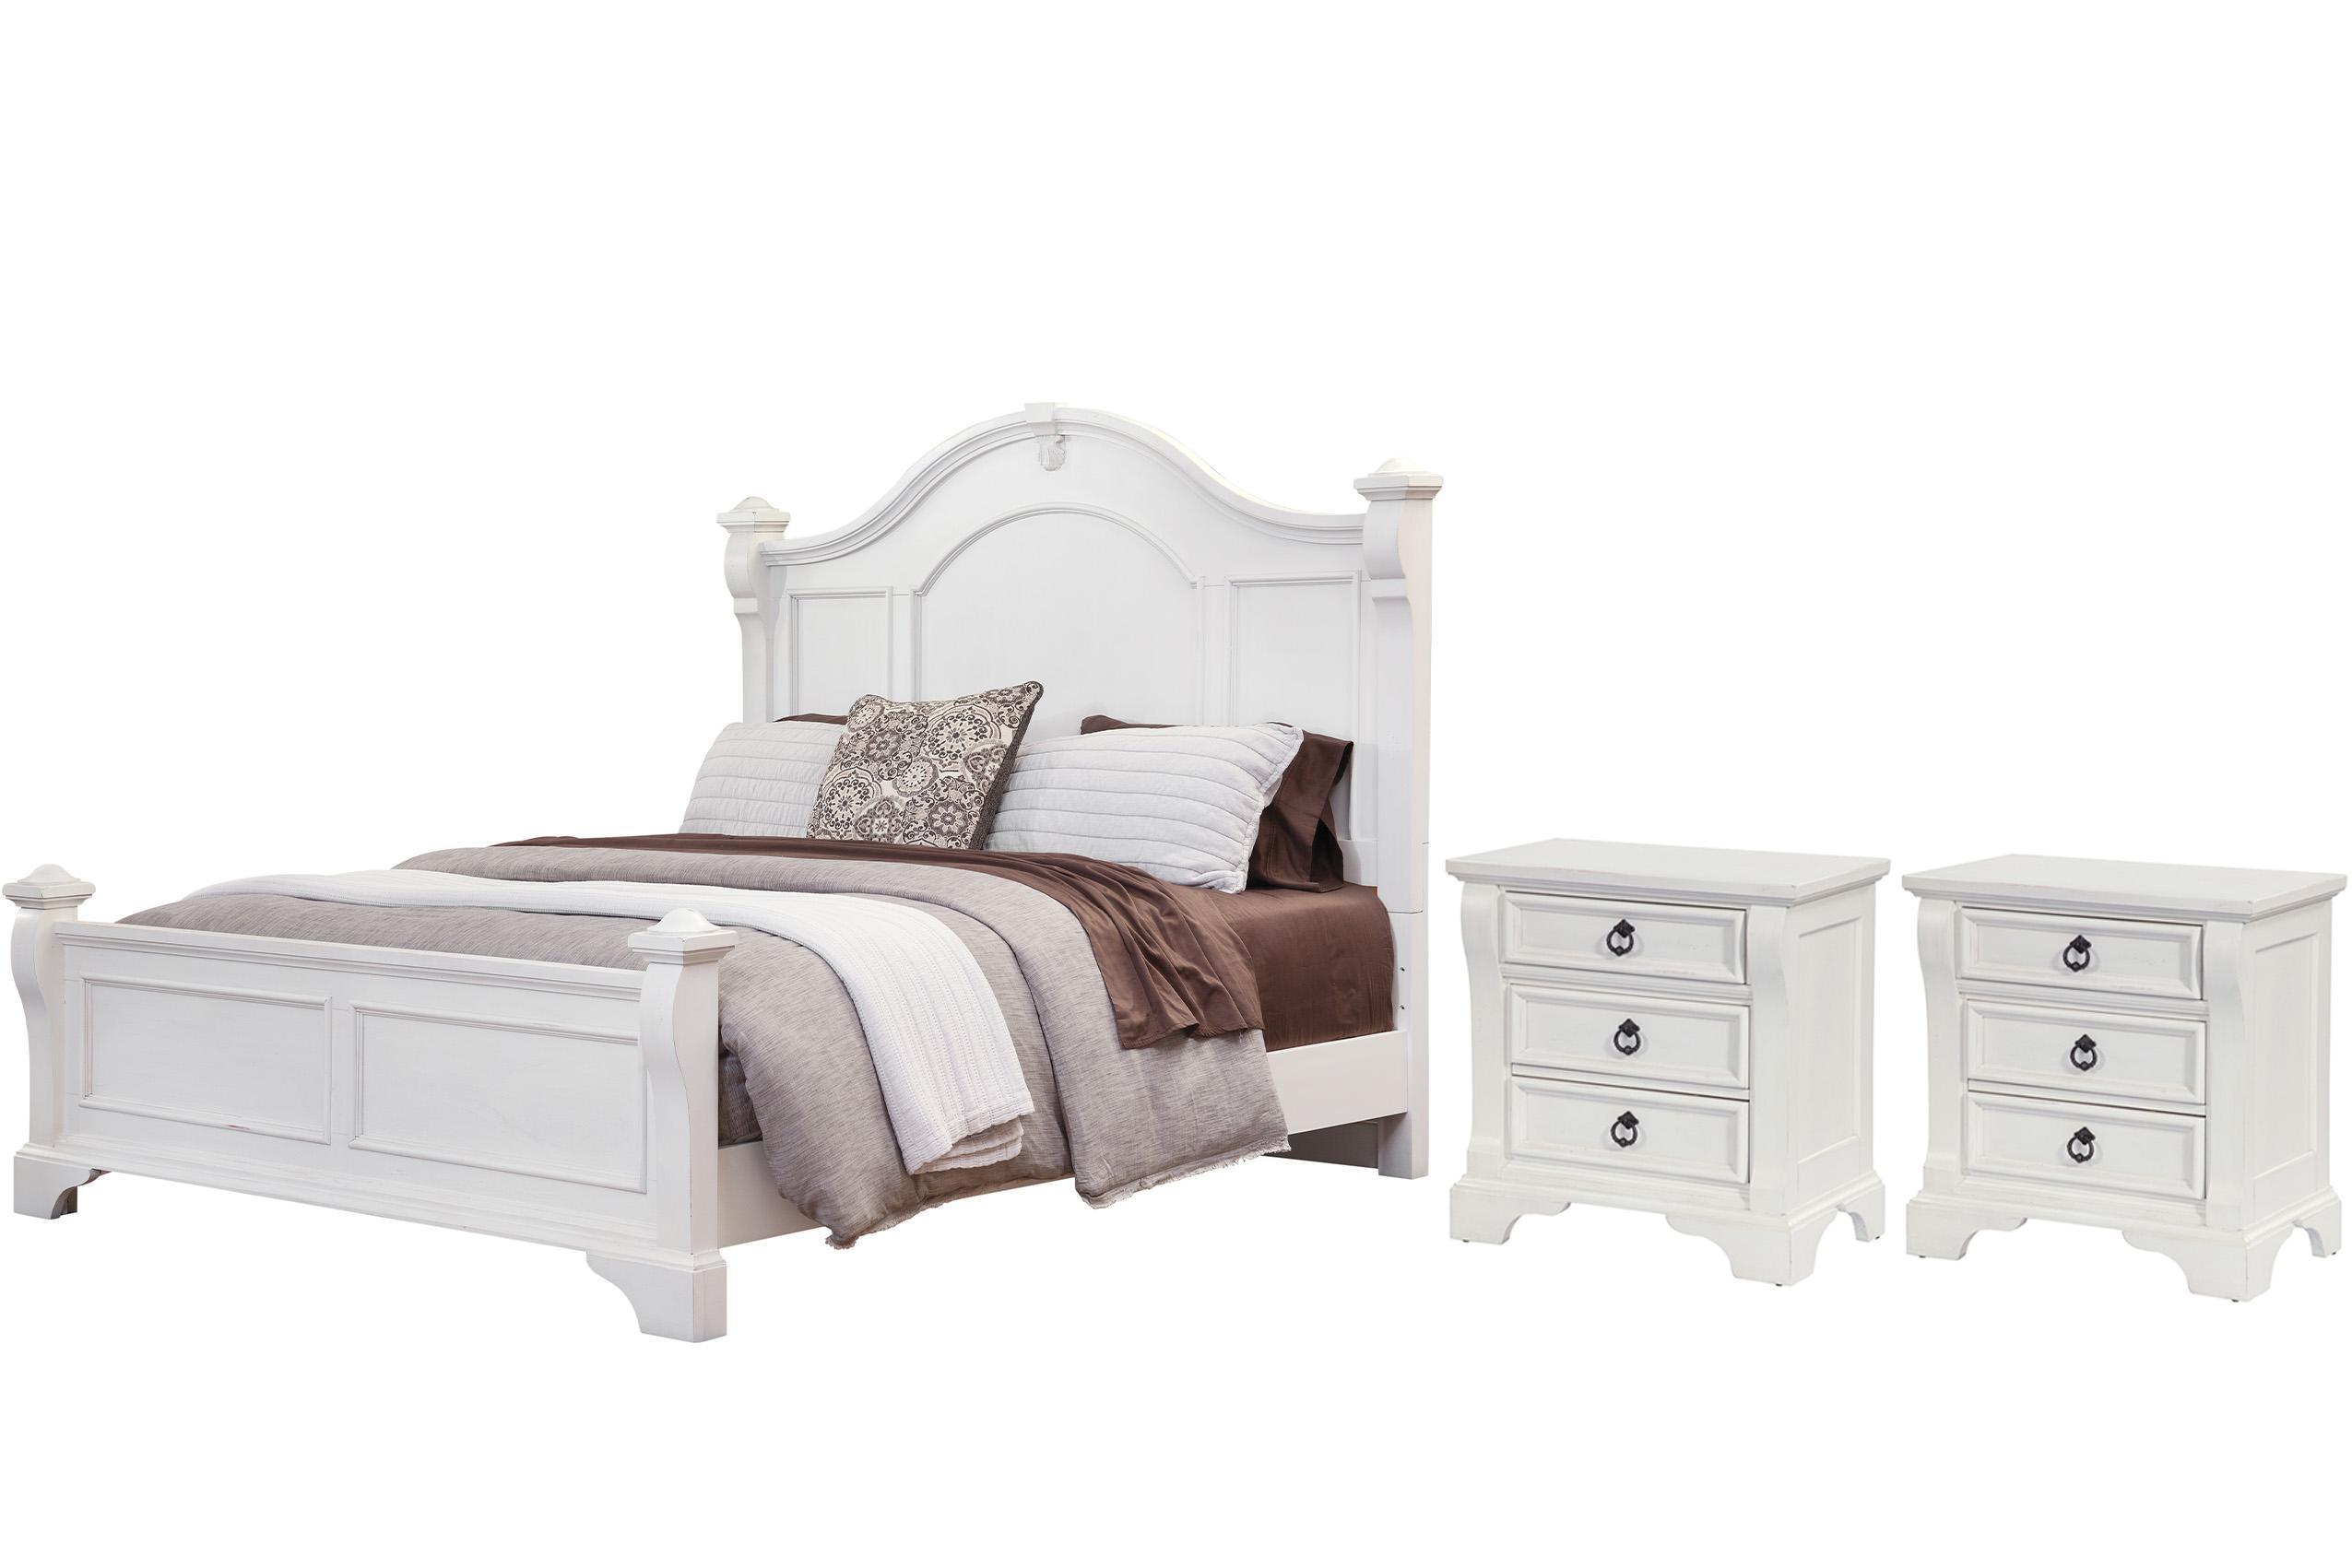 Classic, Traditional, Cottage Poster Bedroom Set HEIRLOOM 2910-66POS 2910-66POS-2N-3PC in White 